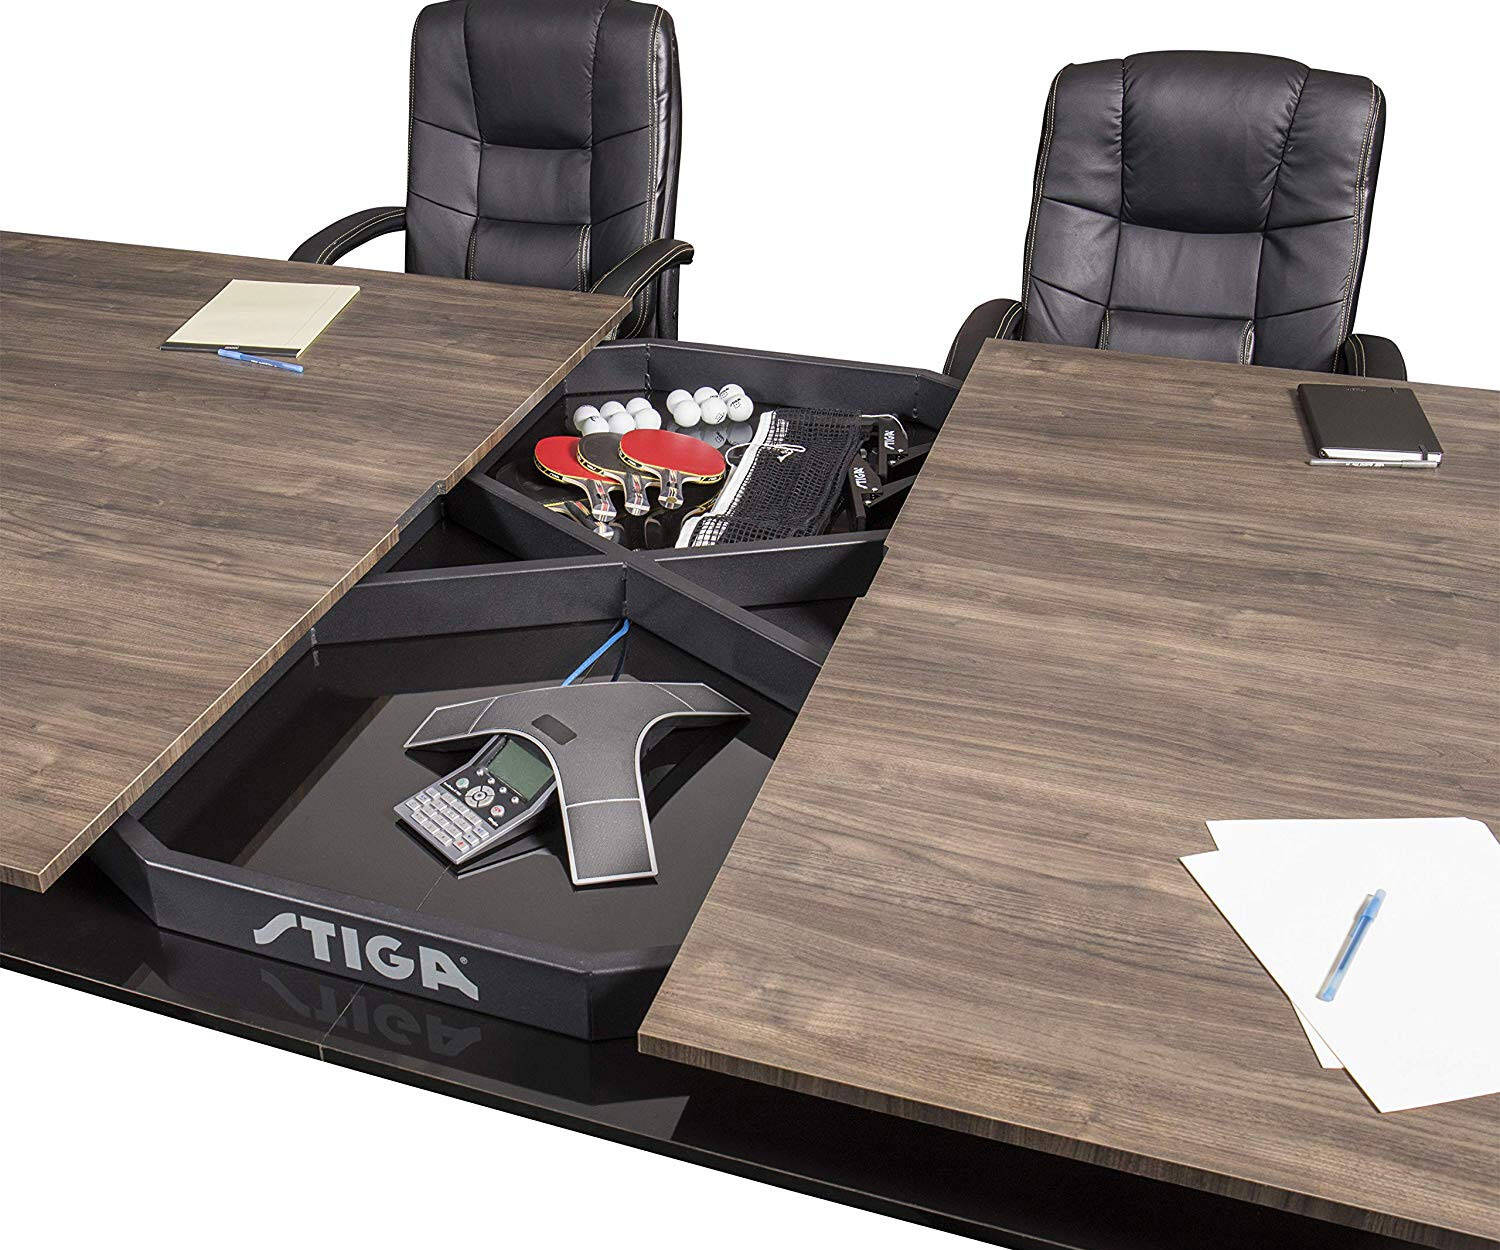 2-in-1 Ping Pong Conference Table - coolthings.us